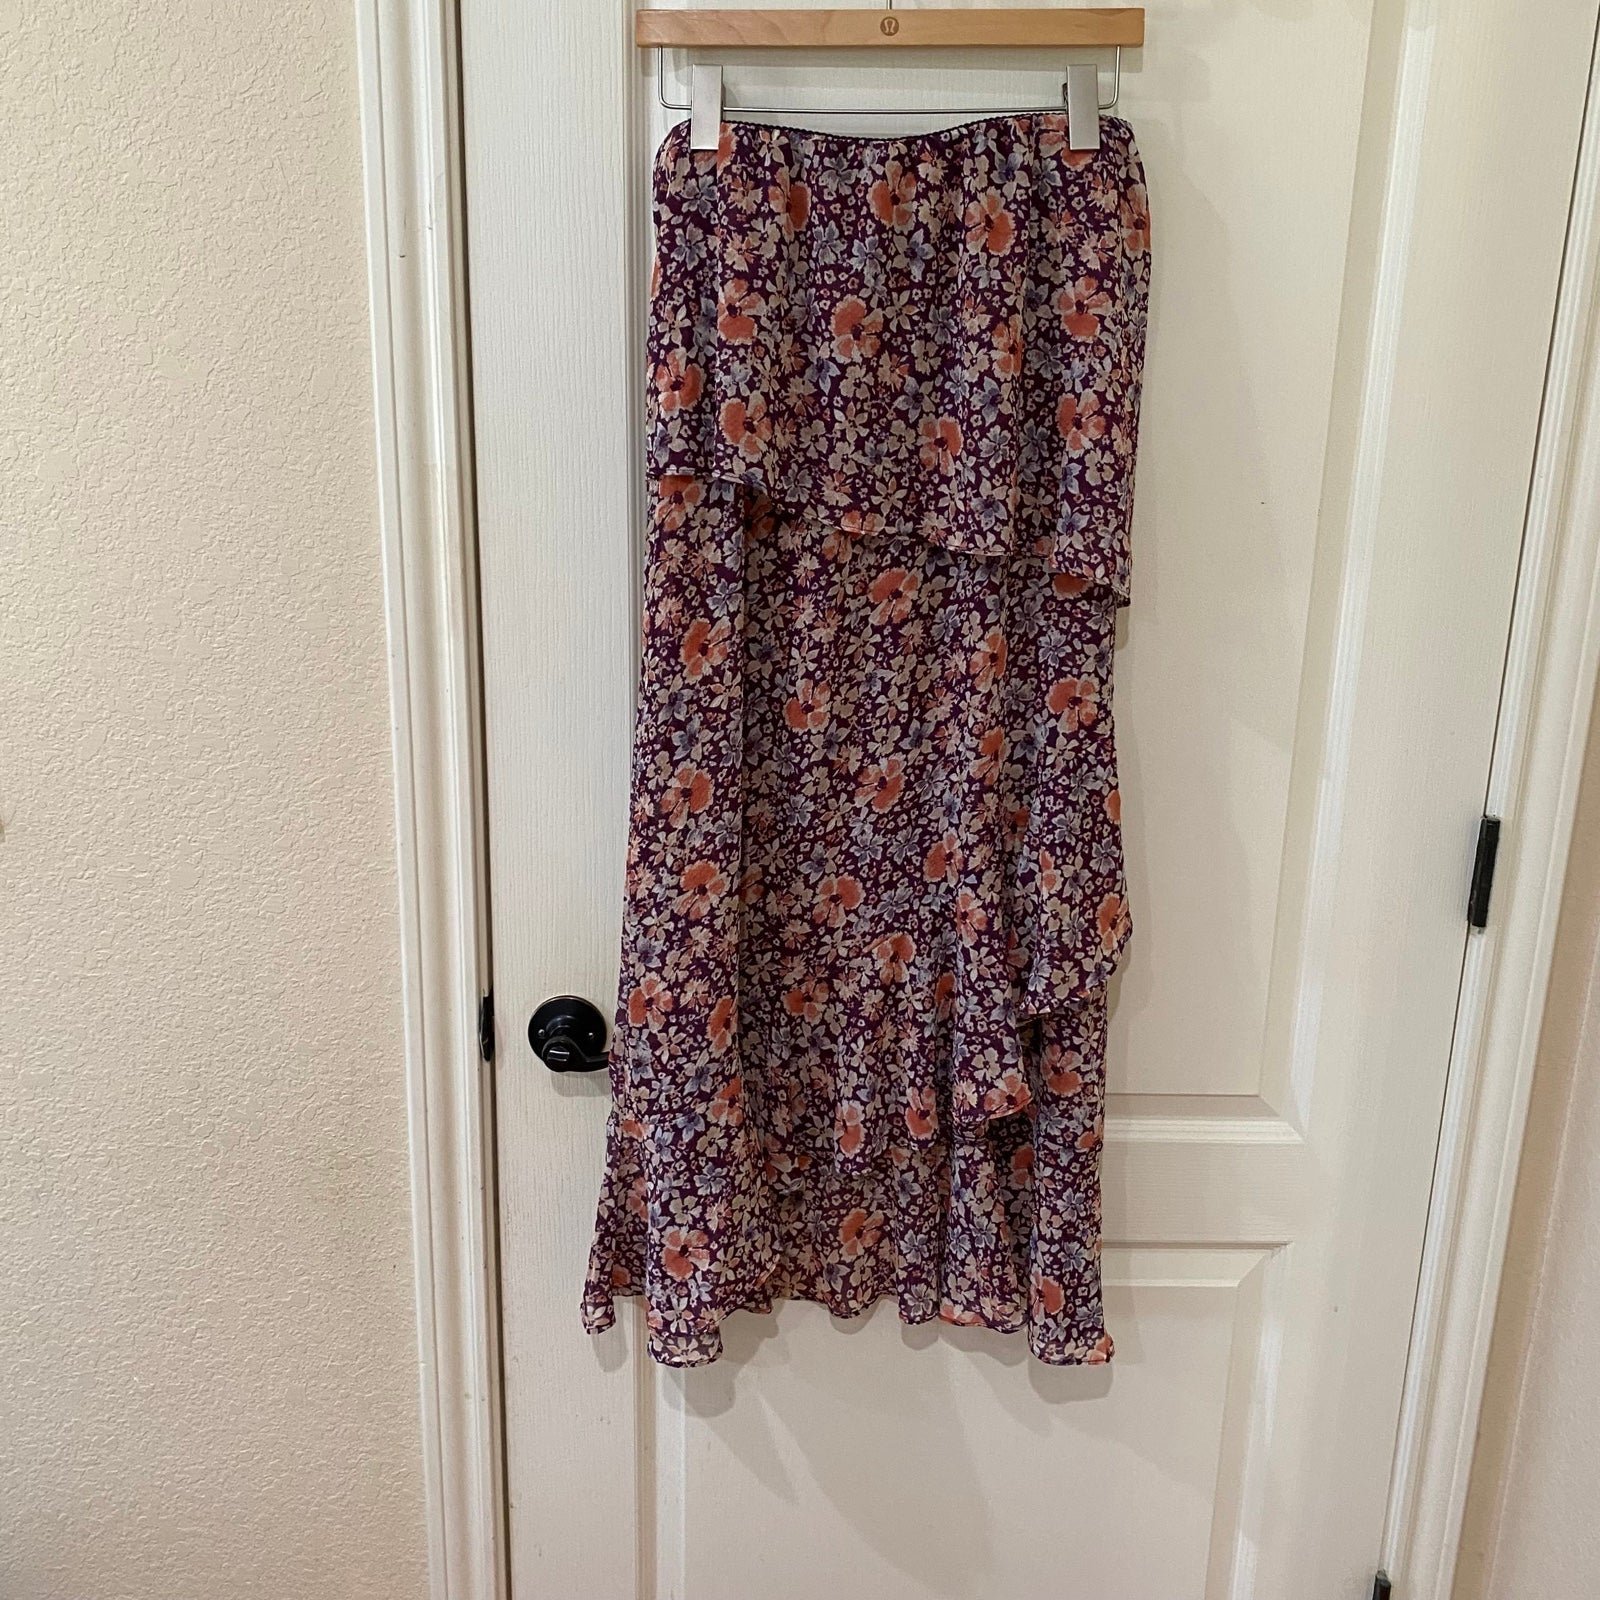 High quality NWOT Free People Romance Me Half slip skirt KQMI8BbEF just for you